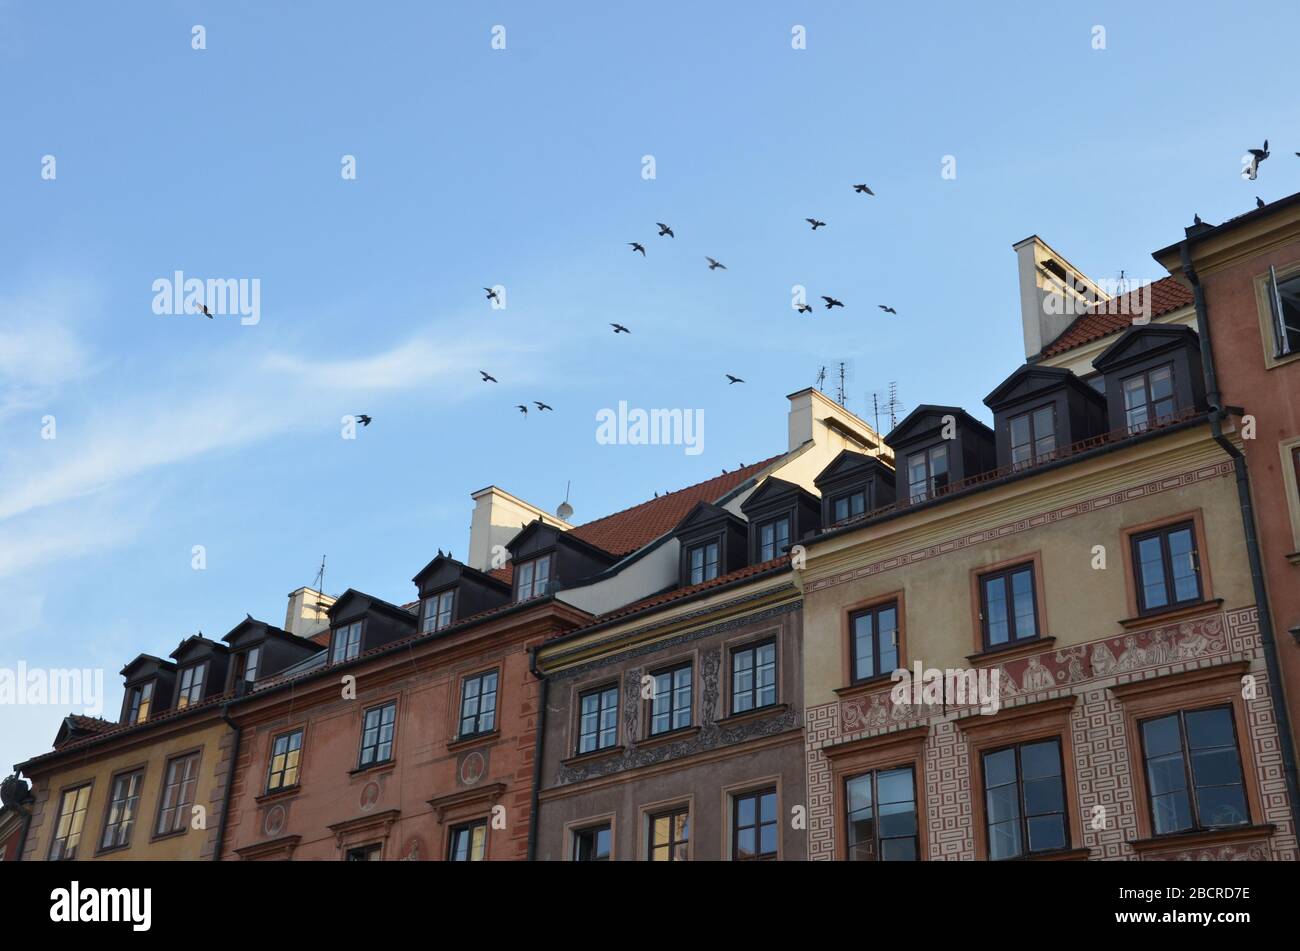 Old Town Market Place, Old Town, August, Warsaw, Poland, 2019 Stock Photo